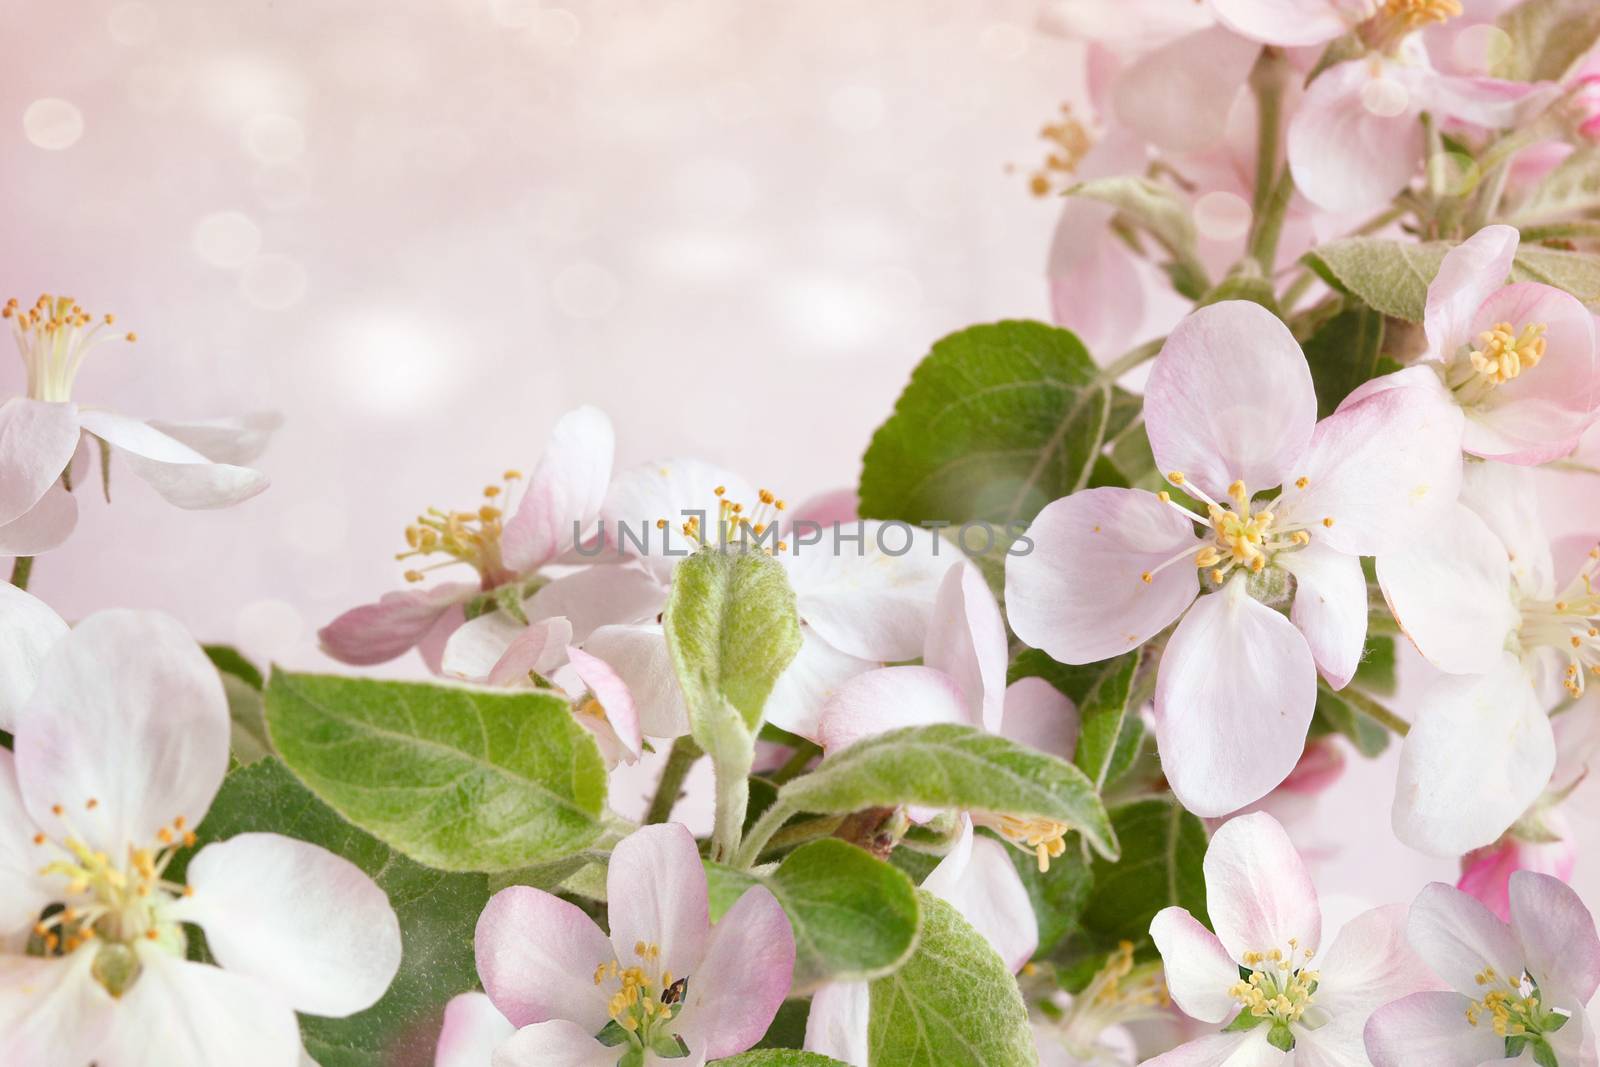 Spring blossoms against soft pink background